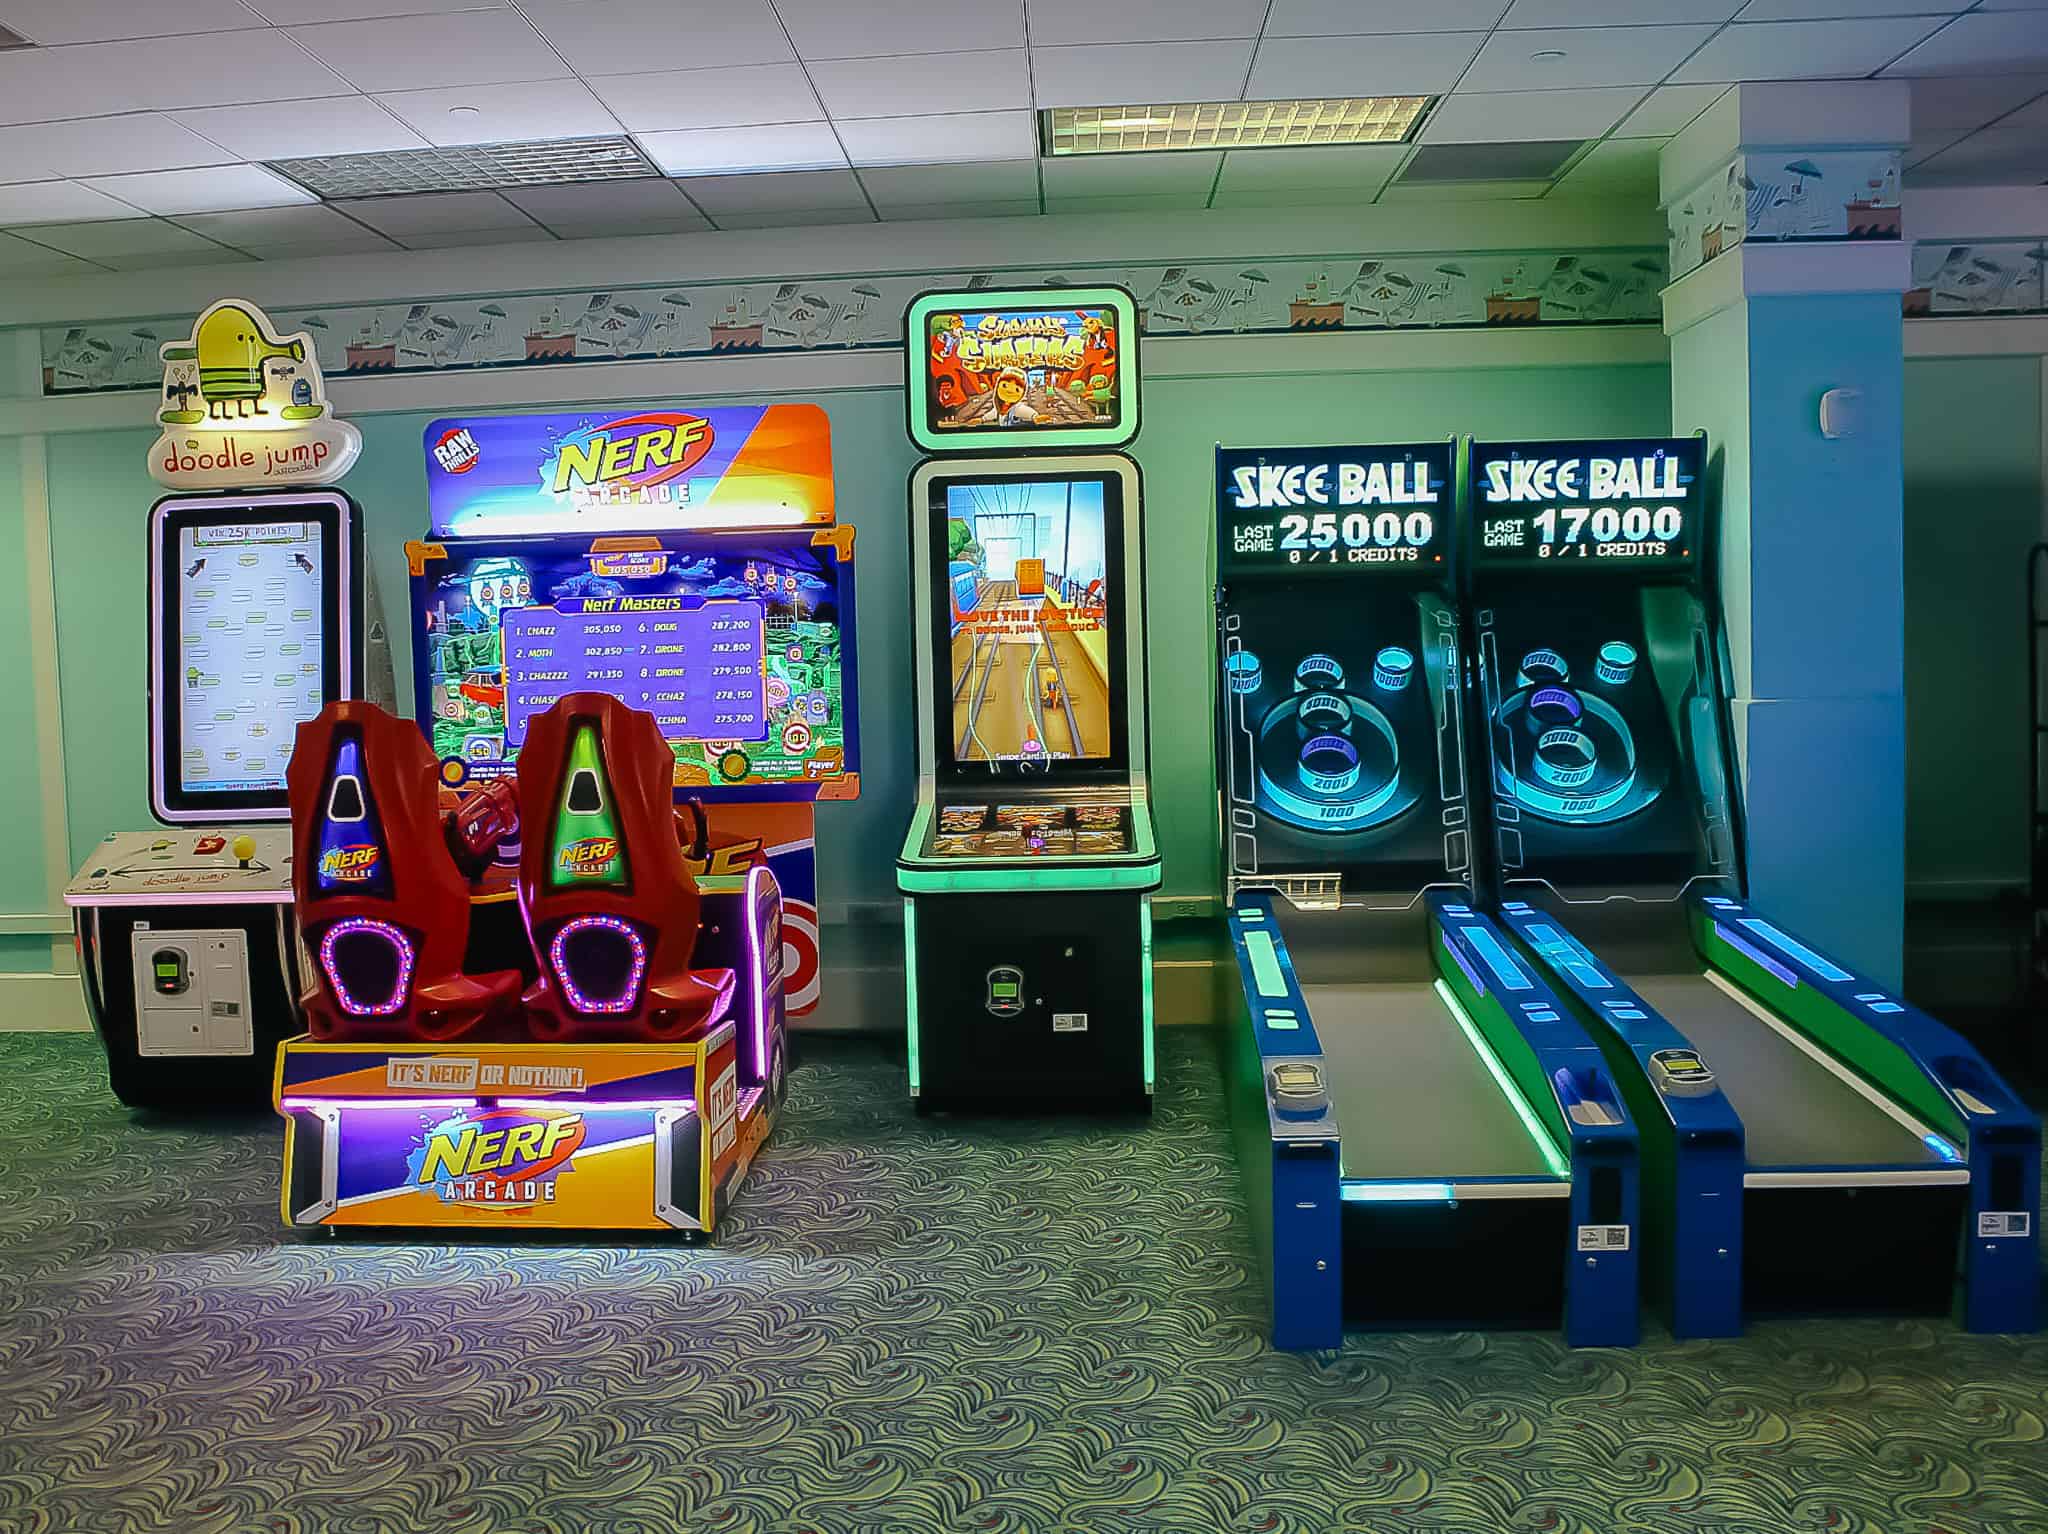 arcade games like Nerf arcade and Skee Ball